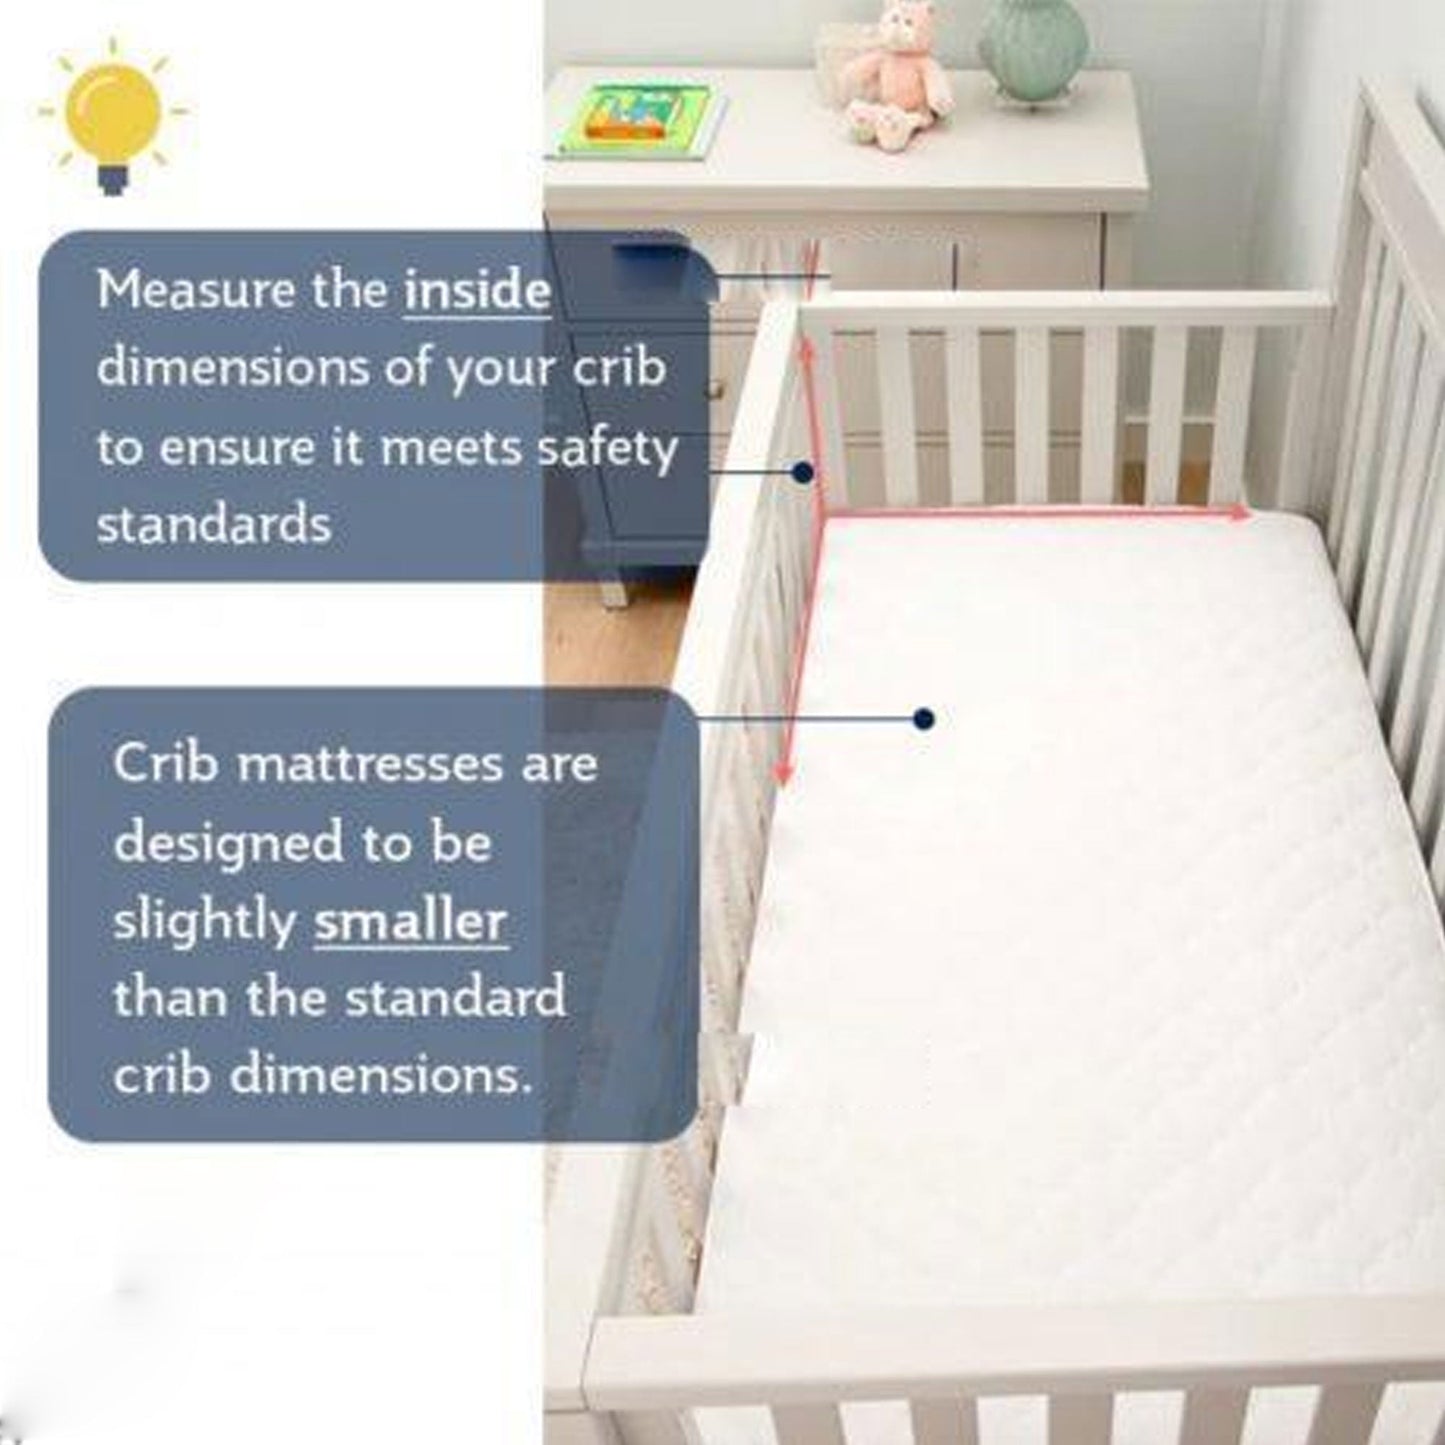 89 X 38 X 4 CM - CRIB Breathable Quilted Cot Baby Mattress - TheComfortshop.co.ukNursery Bedding0721718957270thecomfortshopTheComfortshop.co.ukCrib 89 x 3889 X 38 X 4 CM - CRIB Breathable Quilted Cot Baby Mattress - TheComfortshop.co.uk